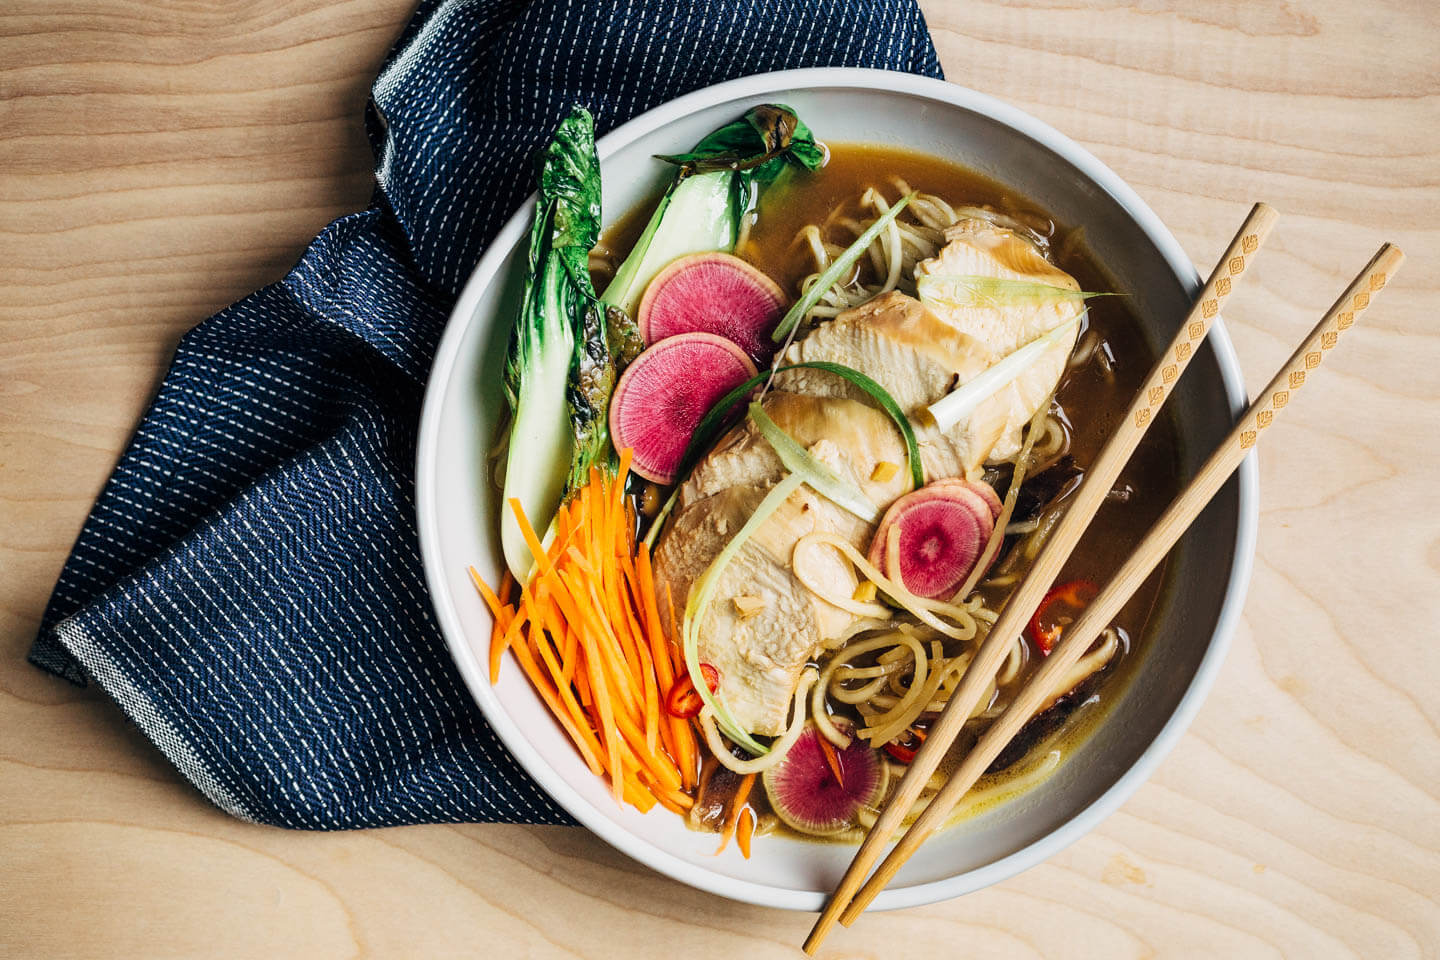 A restorative turnip noodle ramen recipe featuring tender turnip noodles and a host of winter vegetables served in a rich ramen broth topped with juicy, flavorful steamed chicken breasts. Recipe is naturally gluten-free and includes a simple Whole30-compliant variation.